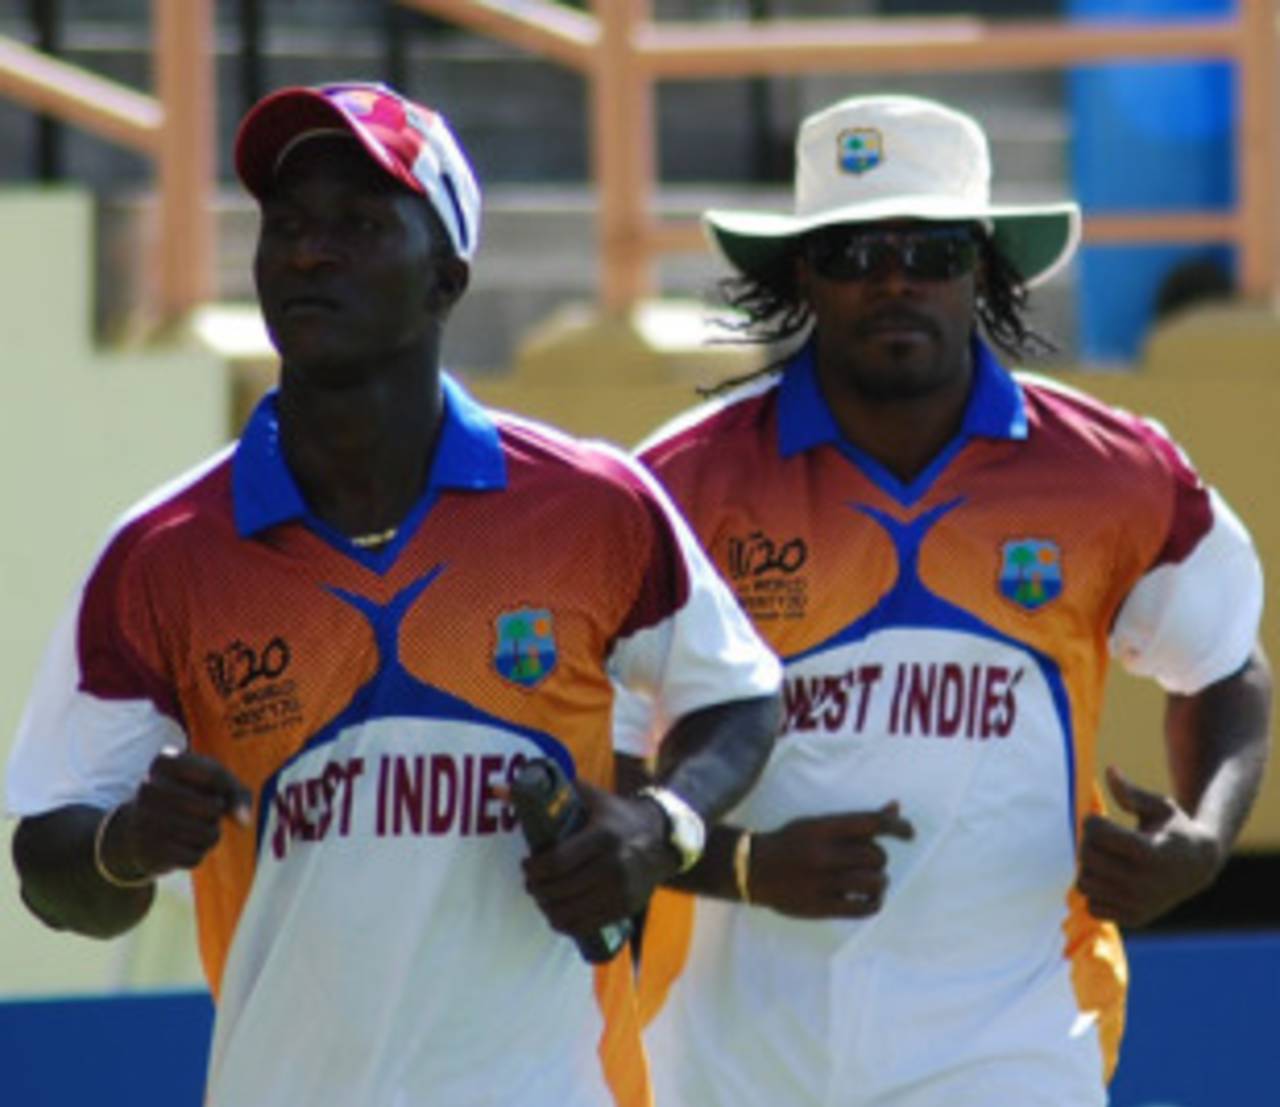 Darren Sammy and Chris Gayle during practice ahead of the World Twenty20, Providence, April 27, 2010